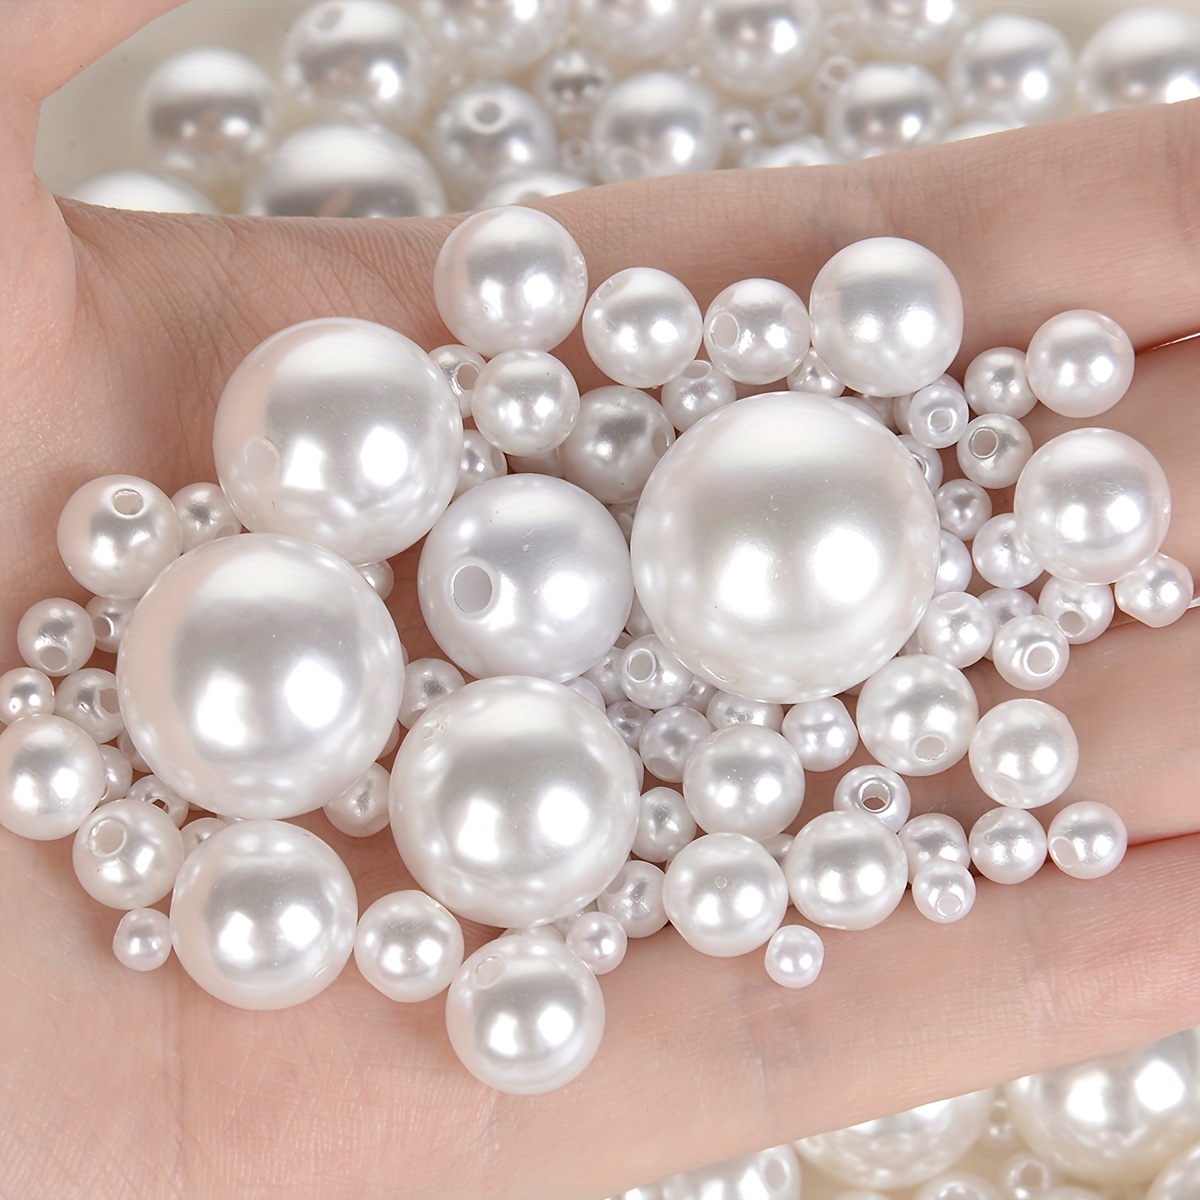 

500-10pcs 3-20mm Abs Pearl Beads Round Beads Craft For Fashion Loose Beads For Jewelry Making White Diy Garment Beads